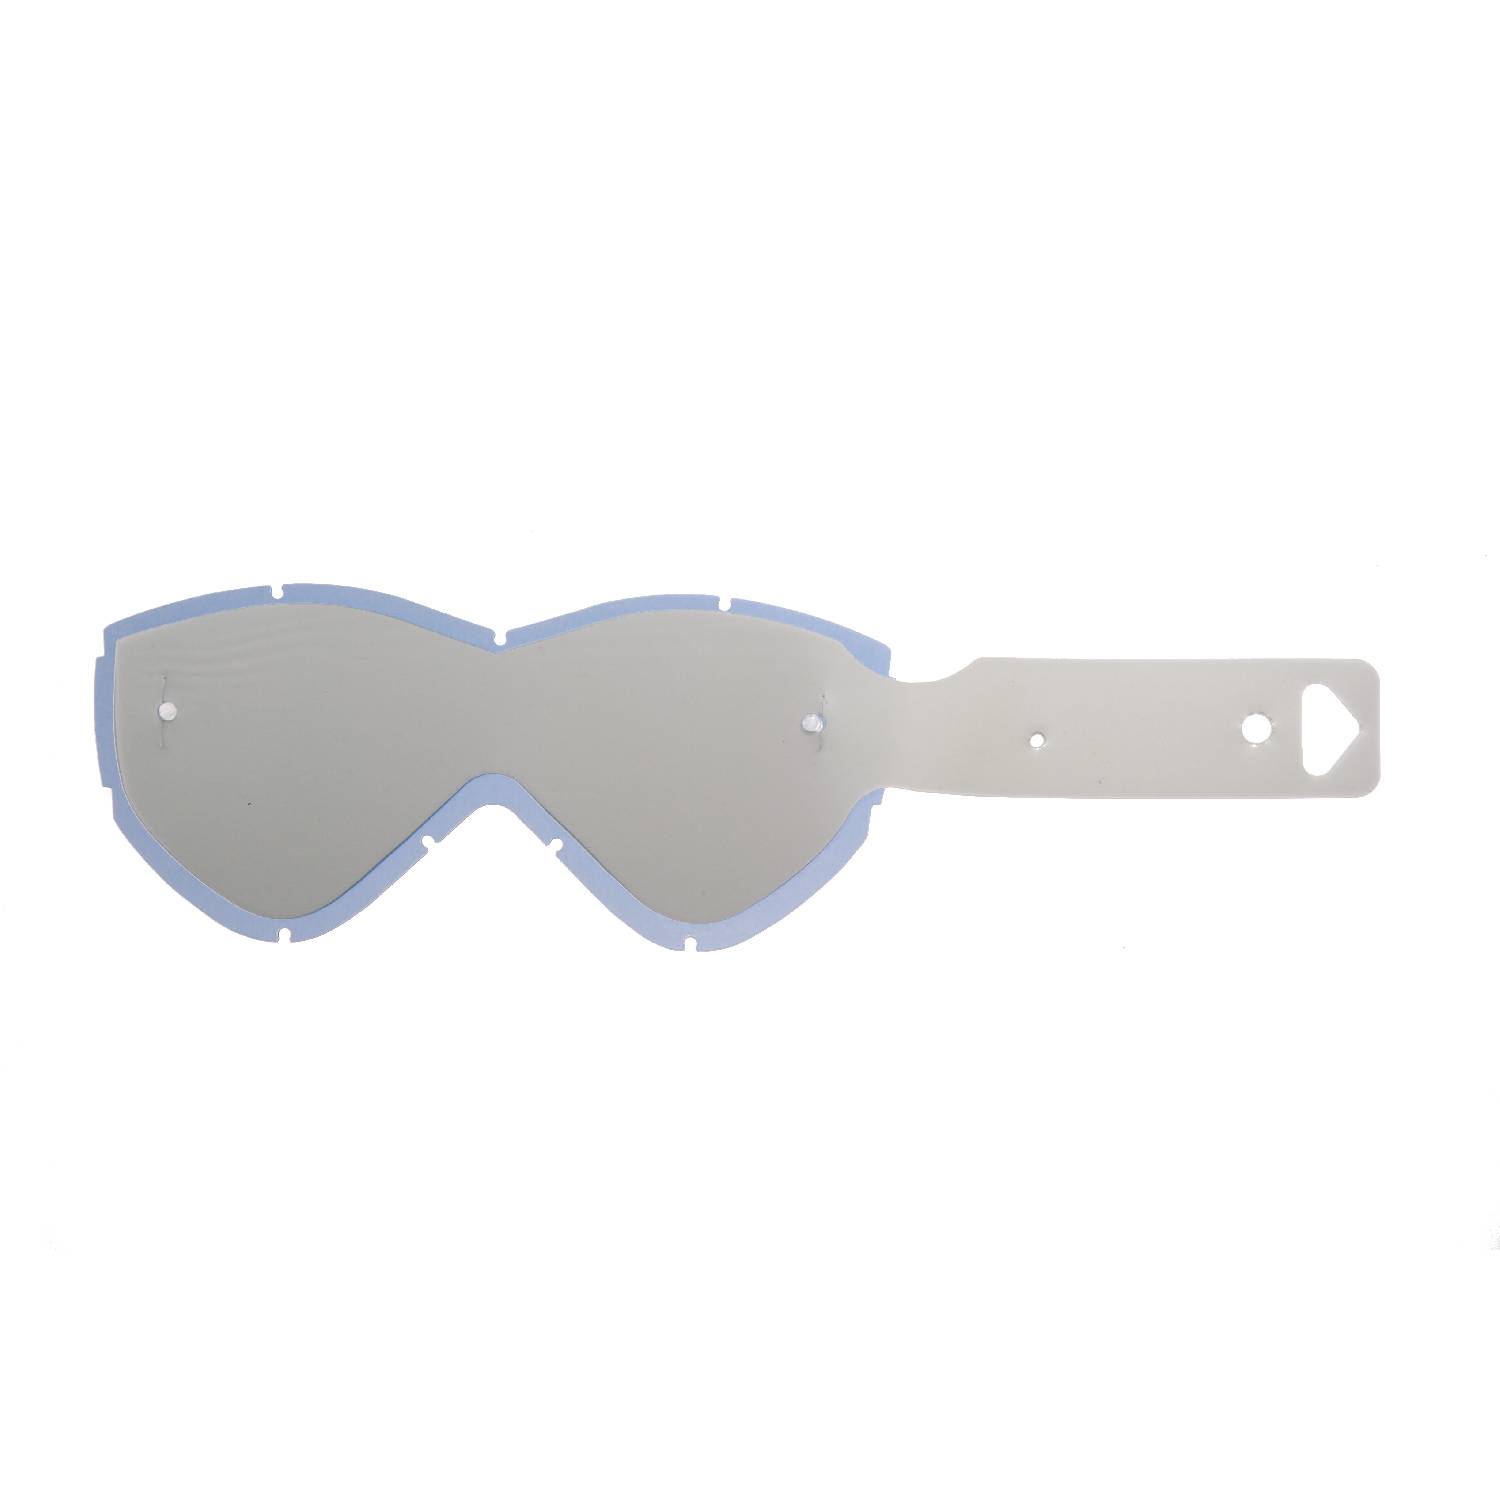 combo lenses with smokey lenses with 10 tear off compatible for Smith Warp goggle